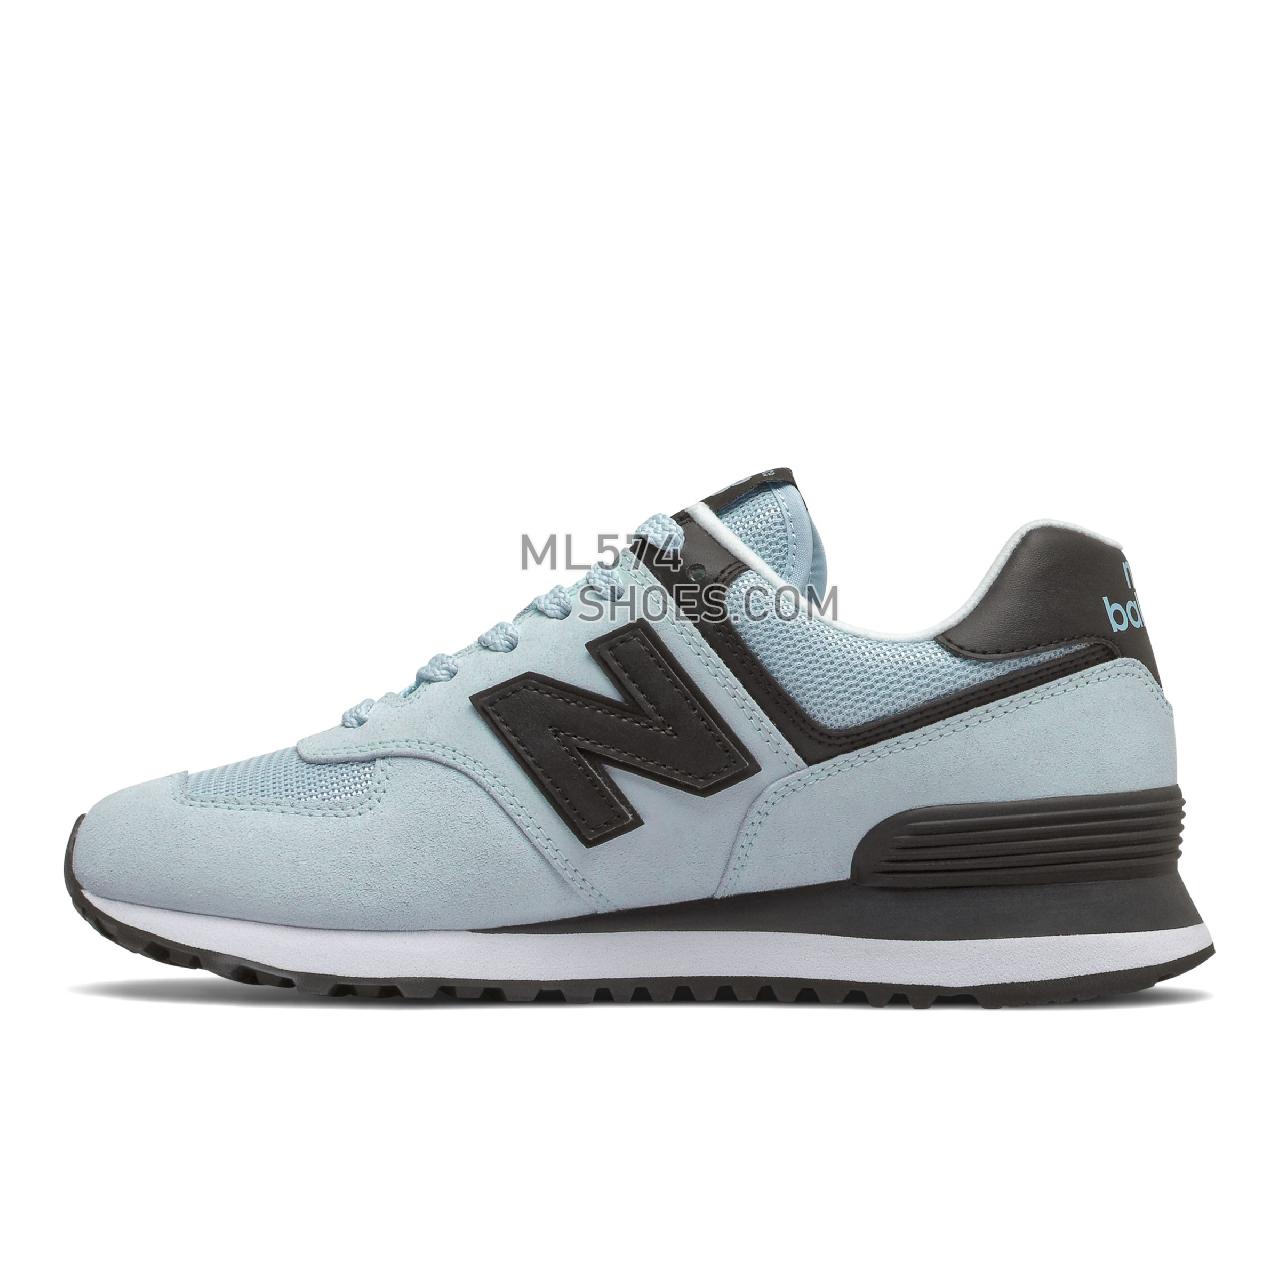 New Balance 574 - Women's Classic Sneakers - Morning Tide with Black - WL574MA2